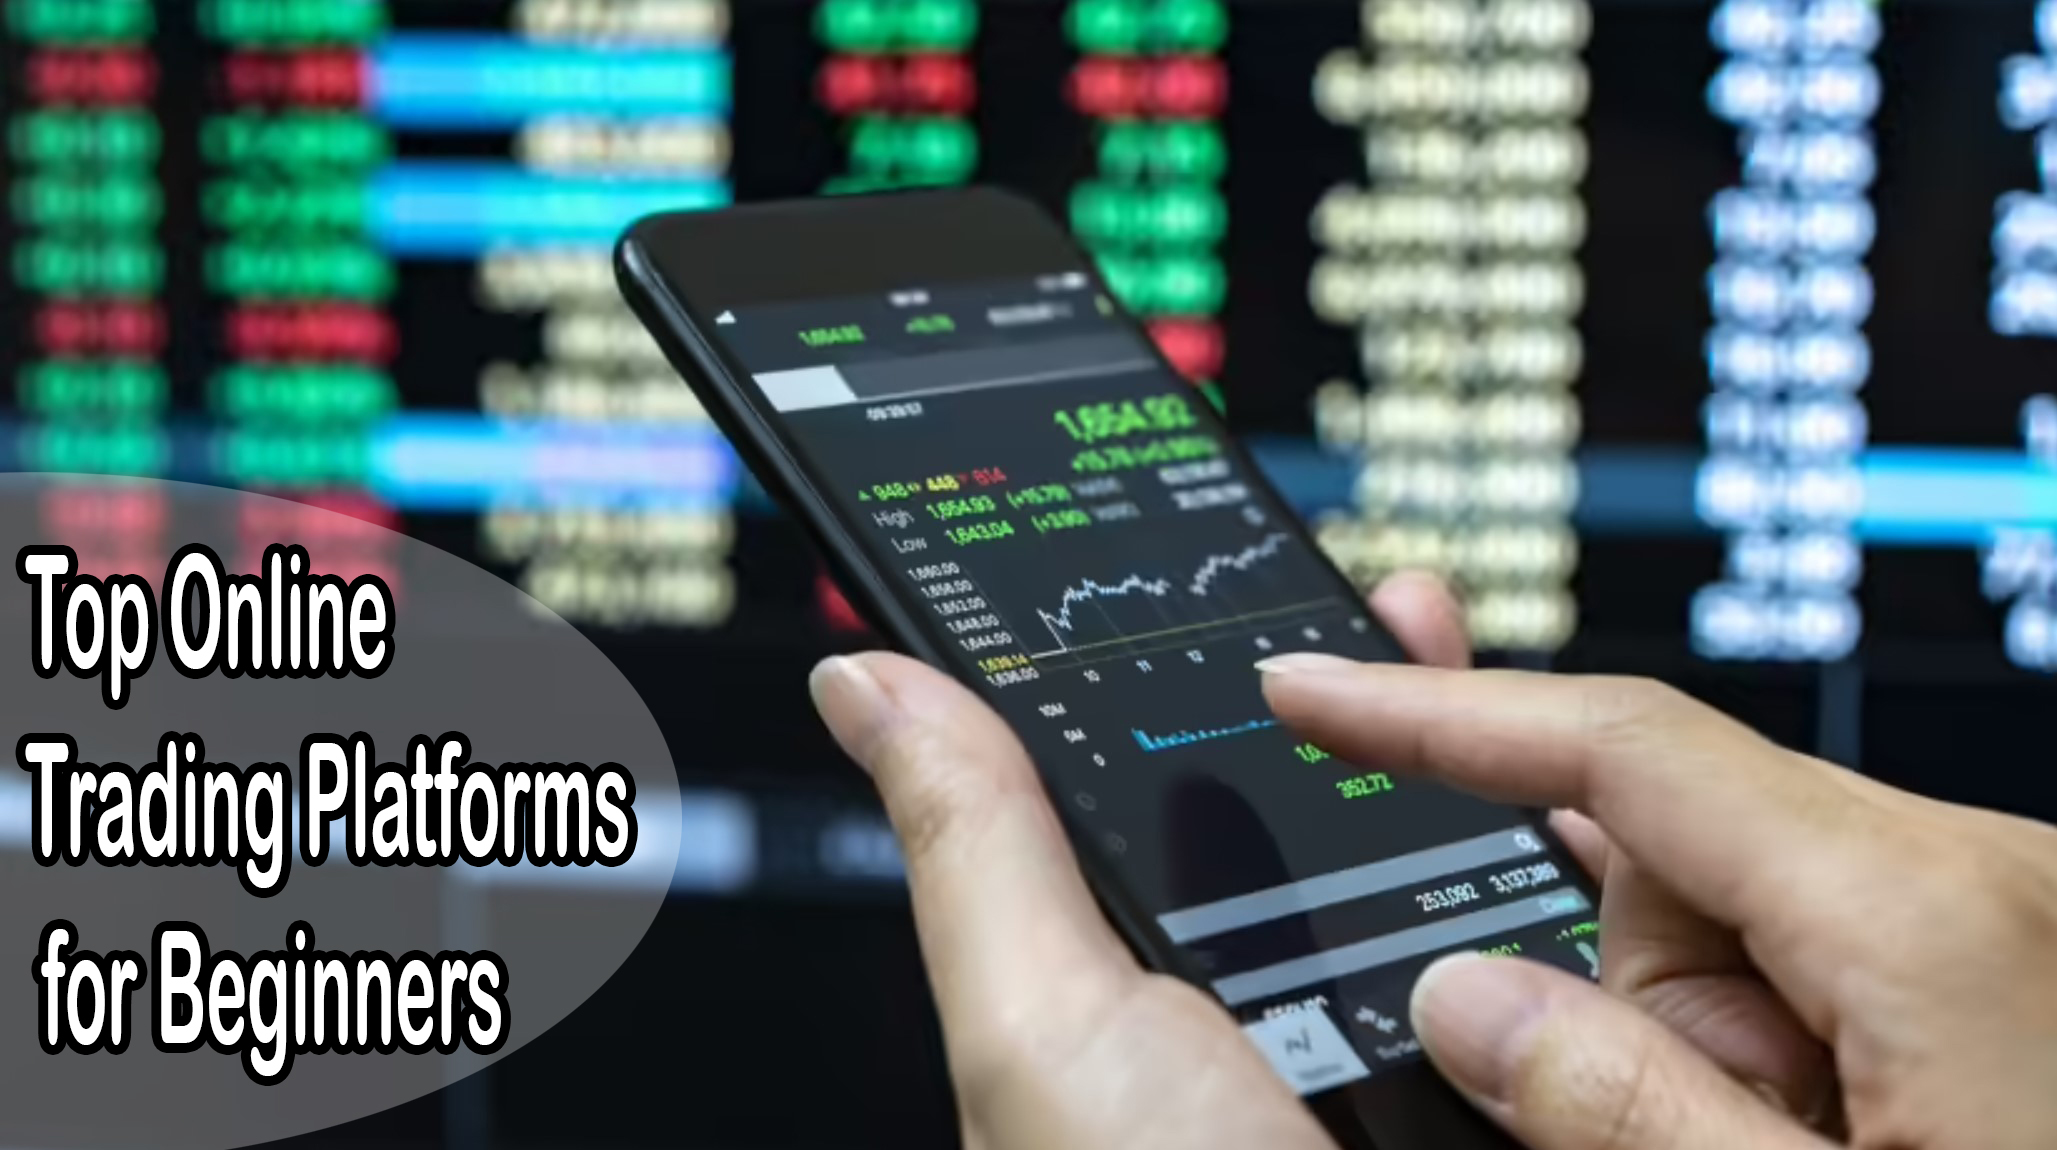 Top Online Trading Platforms for Beginners